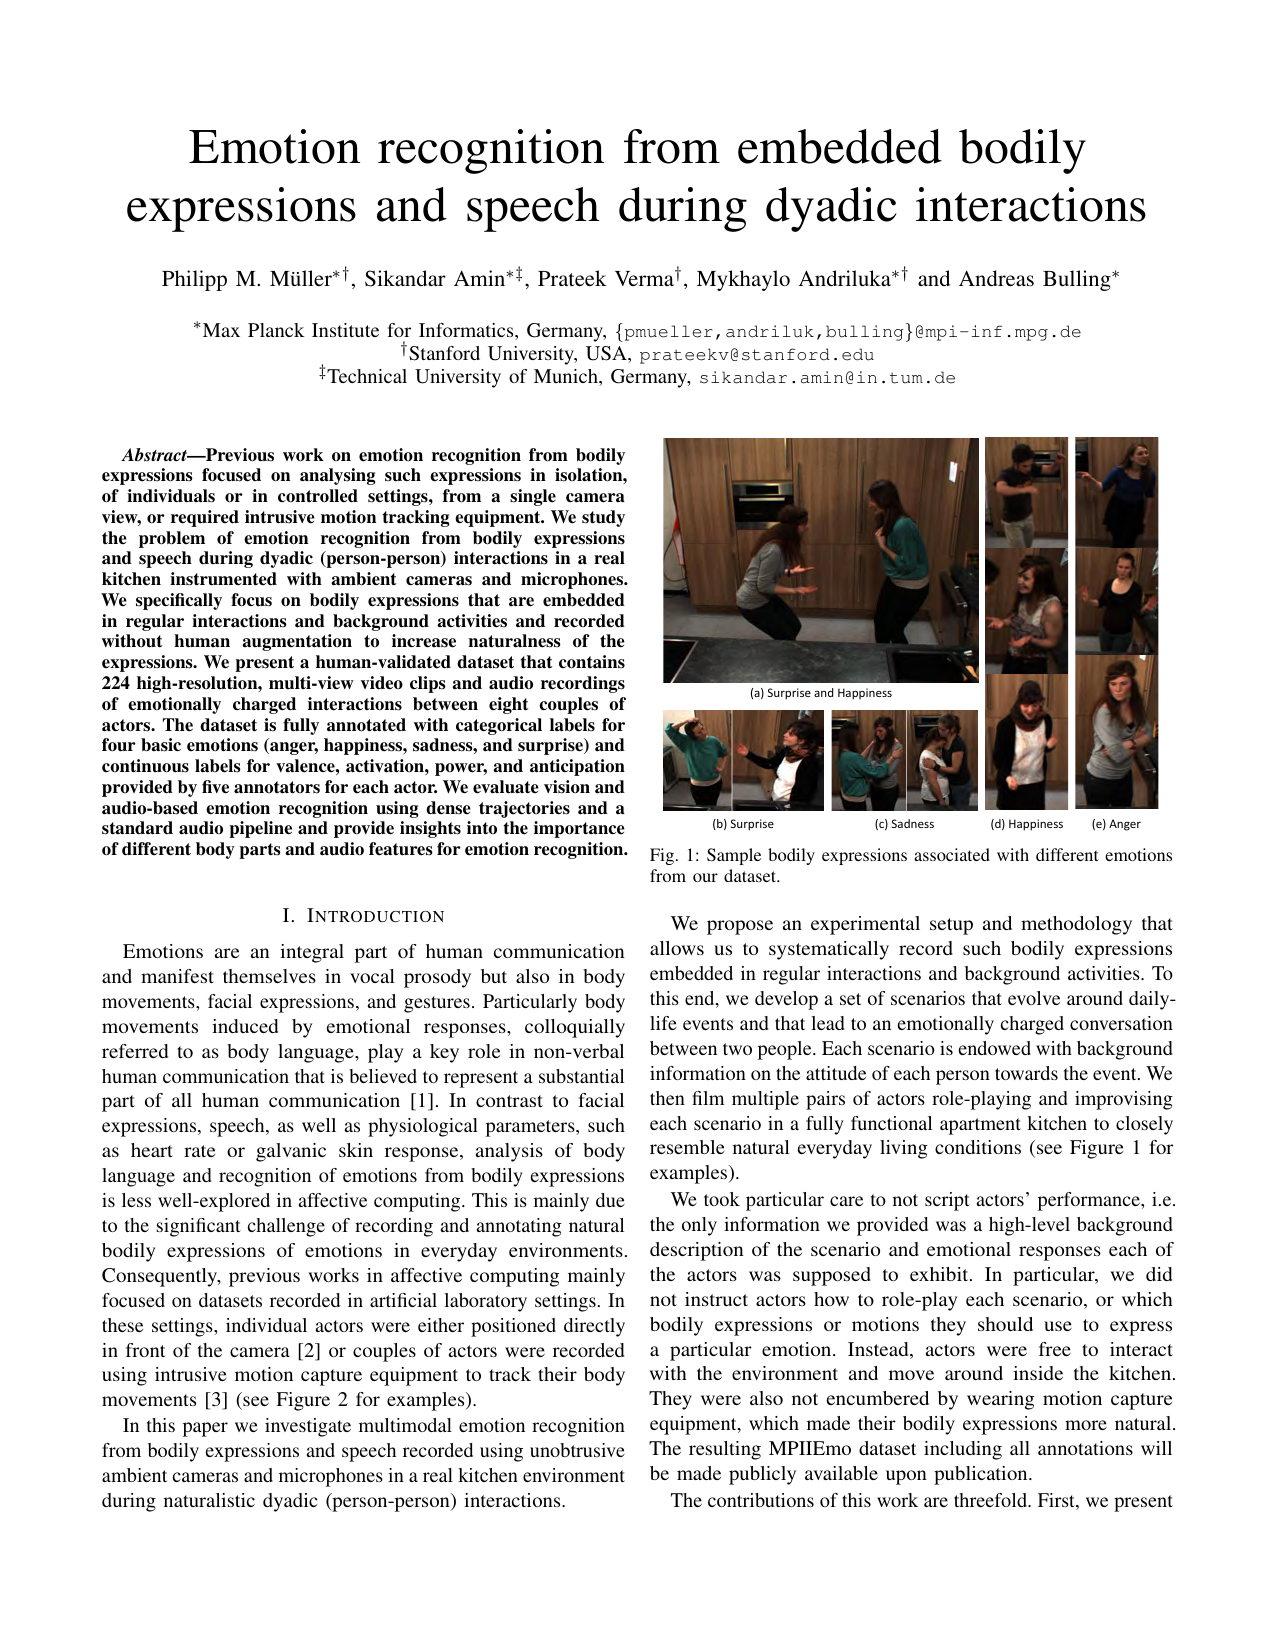 Emotion recognition from embedded bodily expressions and speech during dyadic interactions